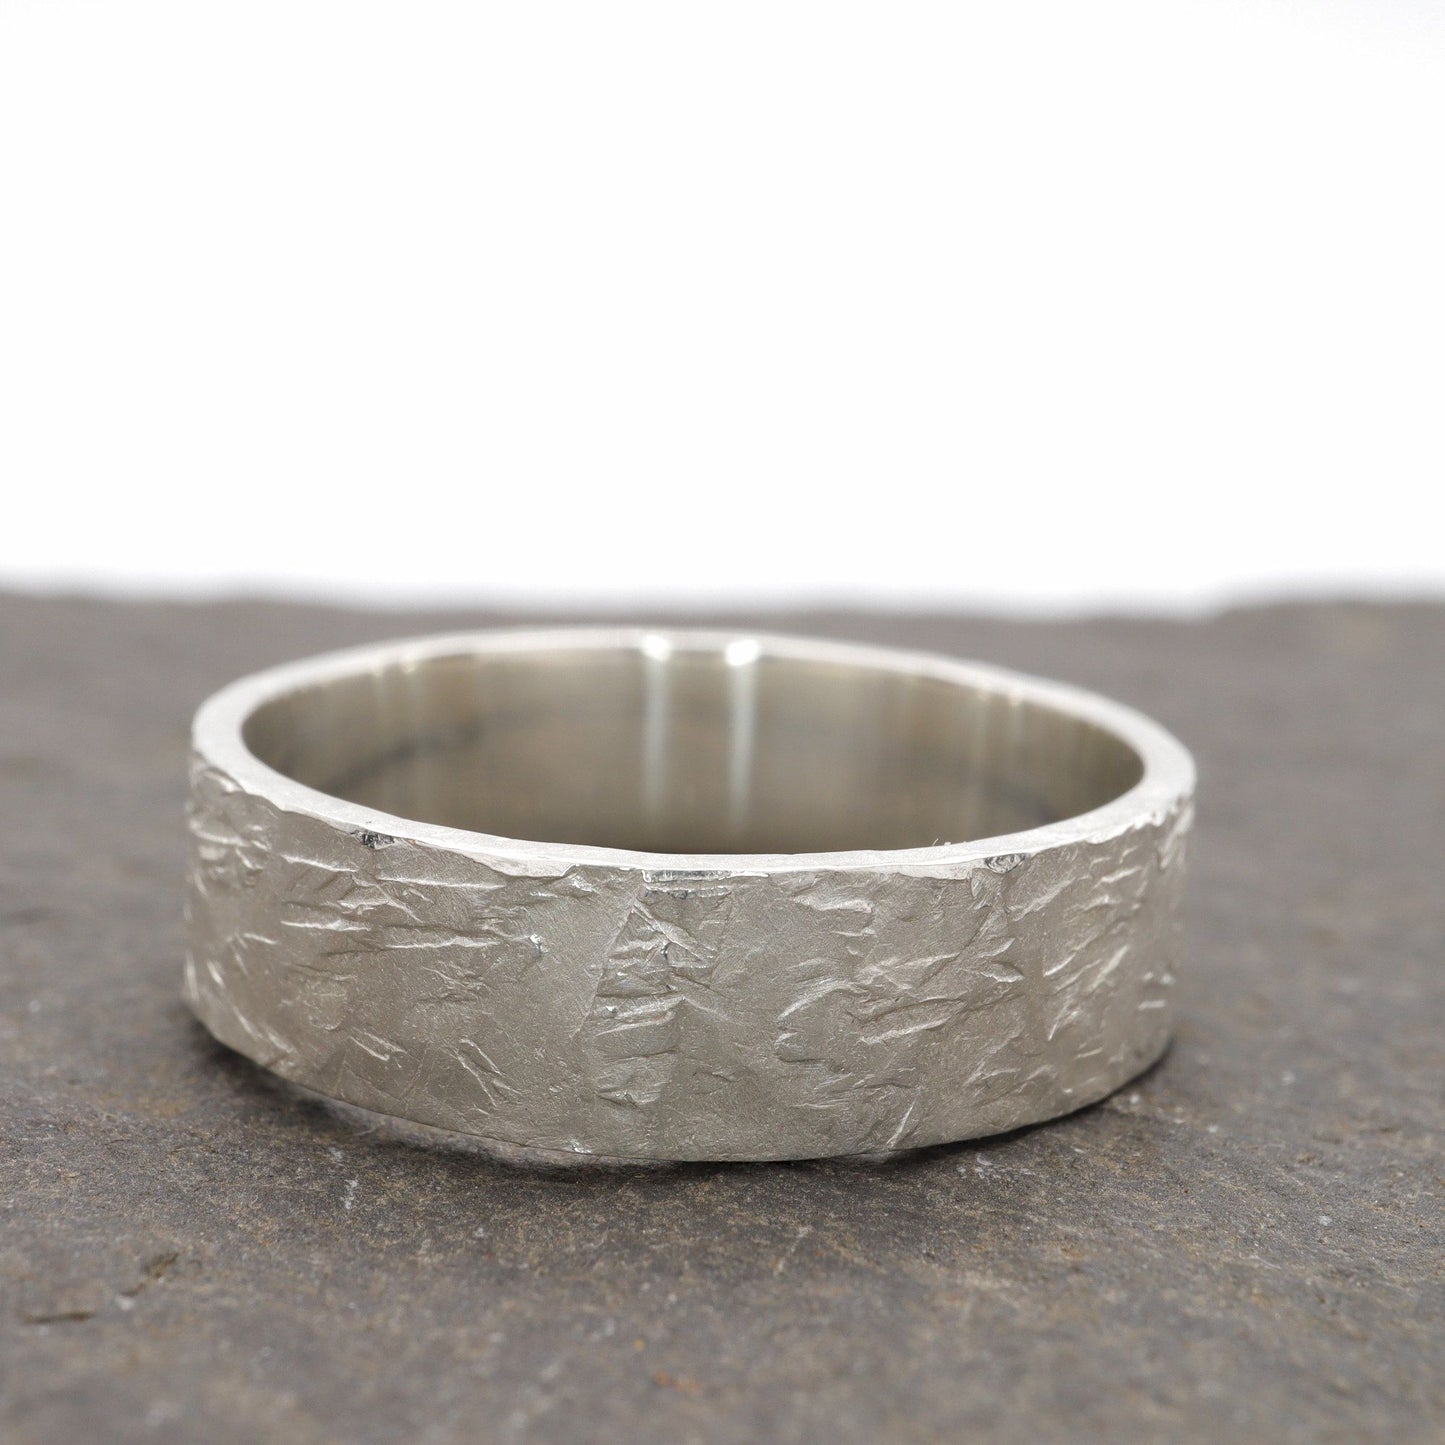 White gold broad wedding ring - rustic flat hammered textured band - Windermere design.